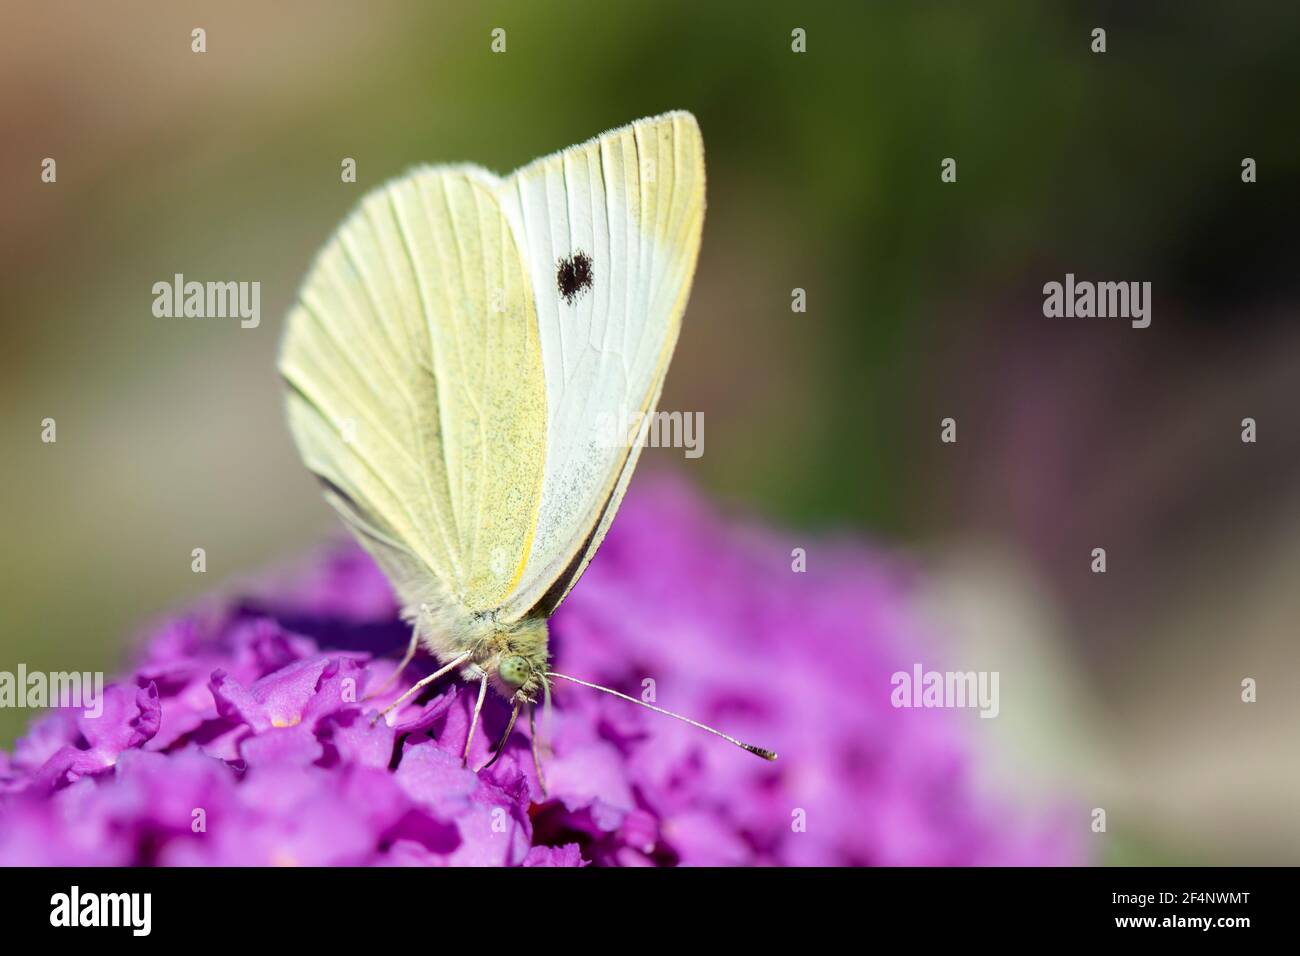 A portrait of a small white butterfly, also known as a cabbage white or cabbage butterfly sitting on the flowers of a pink delight or buddleja bush, f Stock Photo